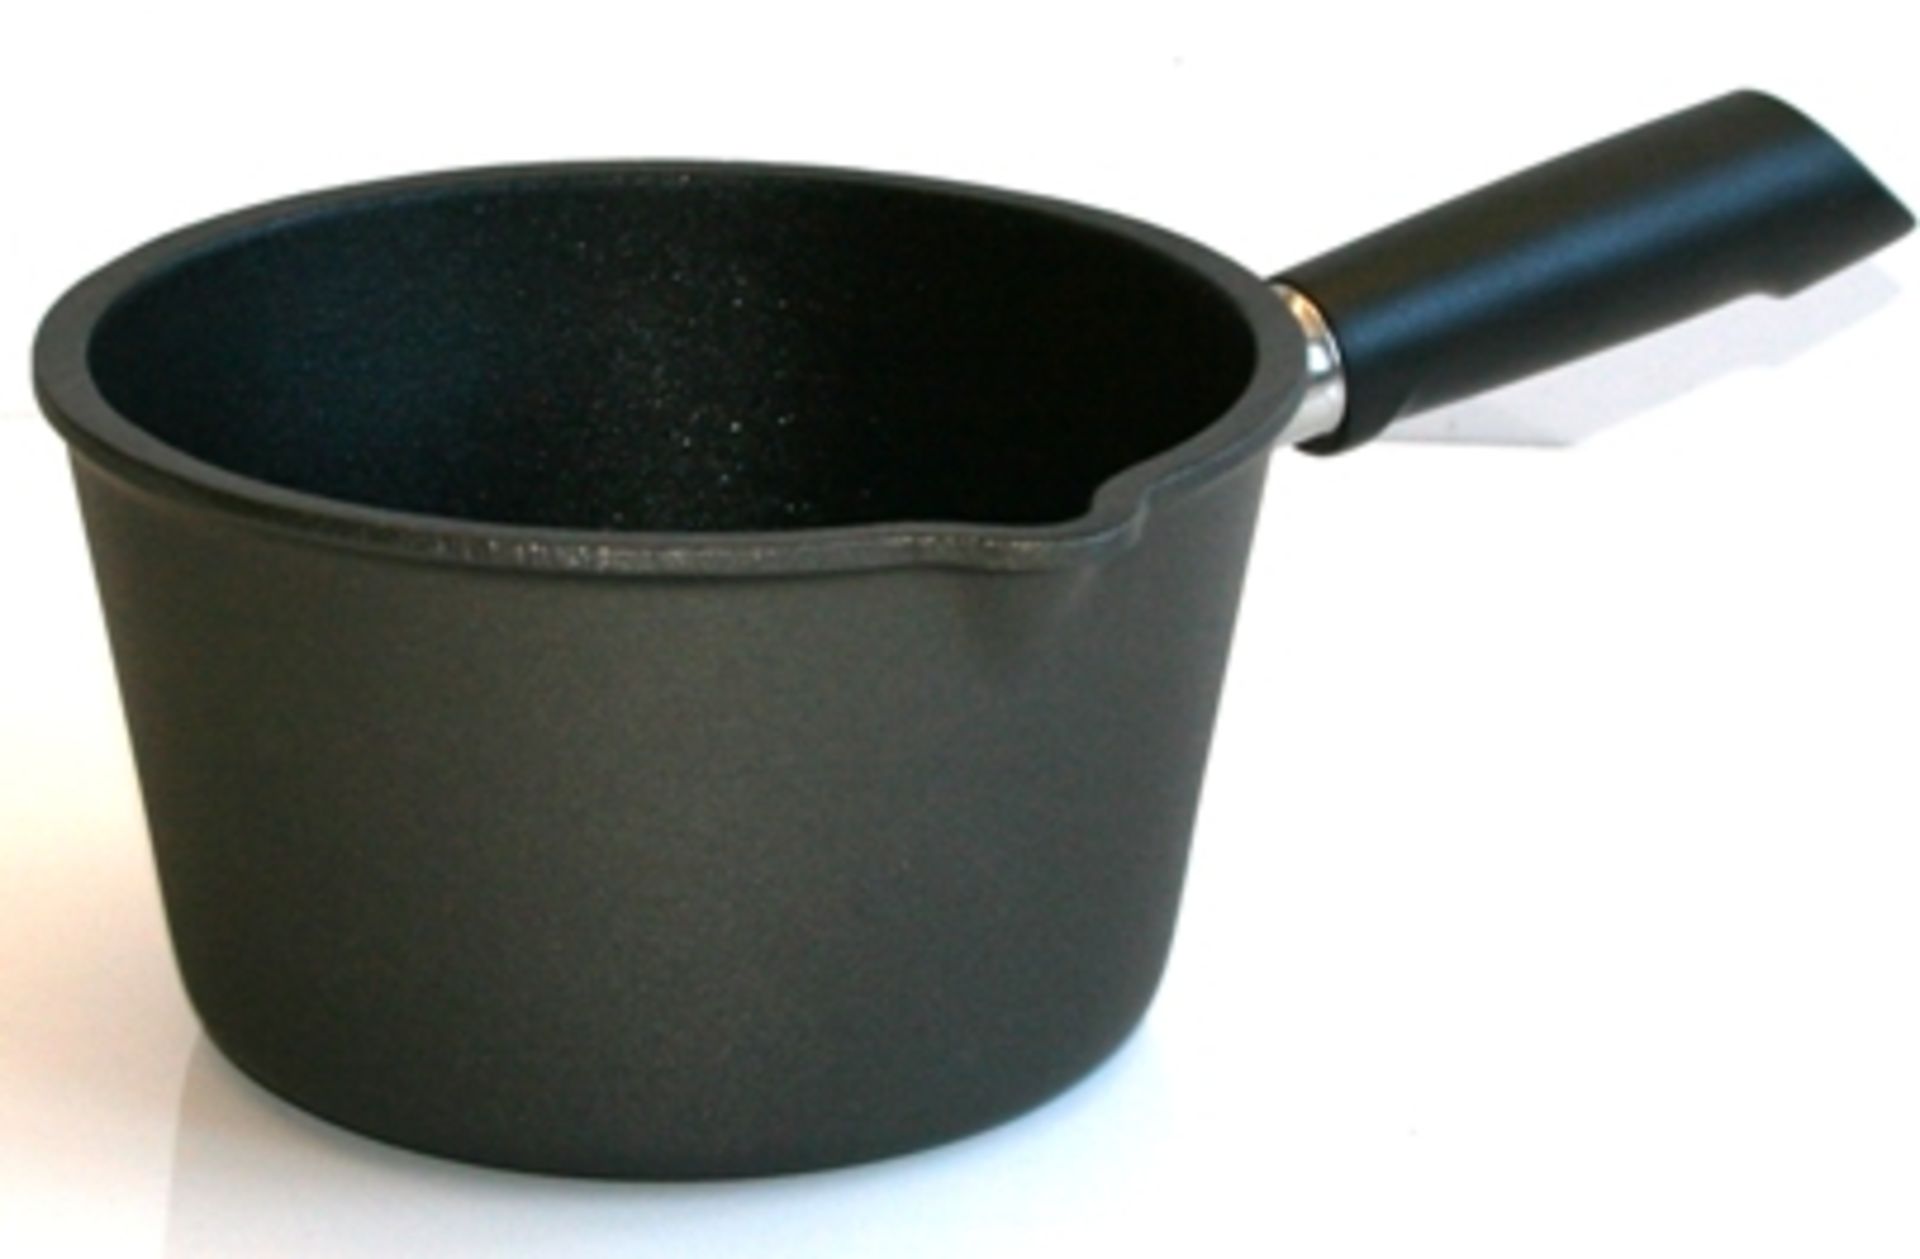 Crafond 18cm Saucepan with fixed handle and lid